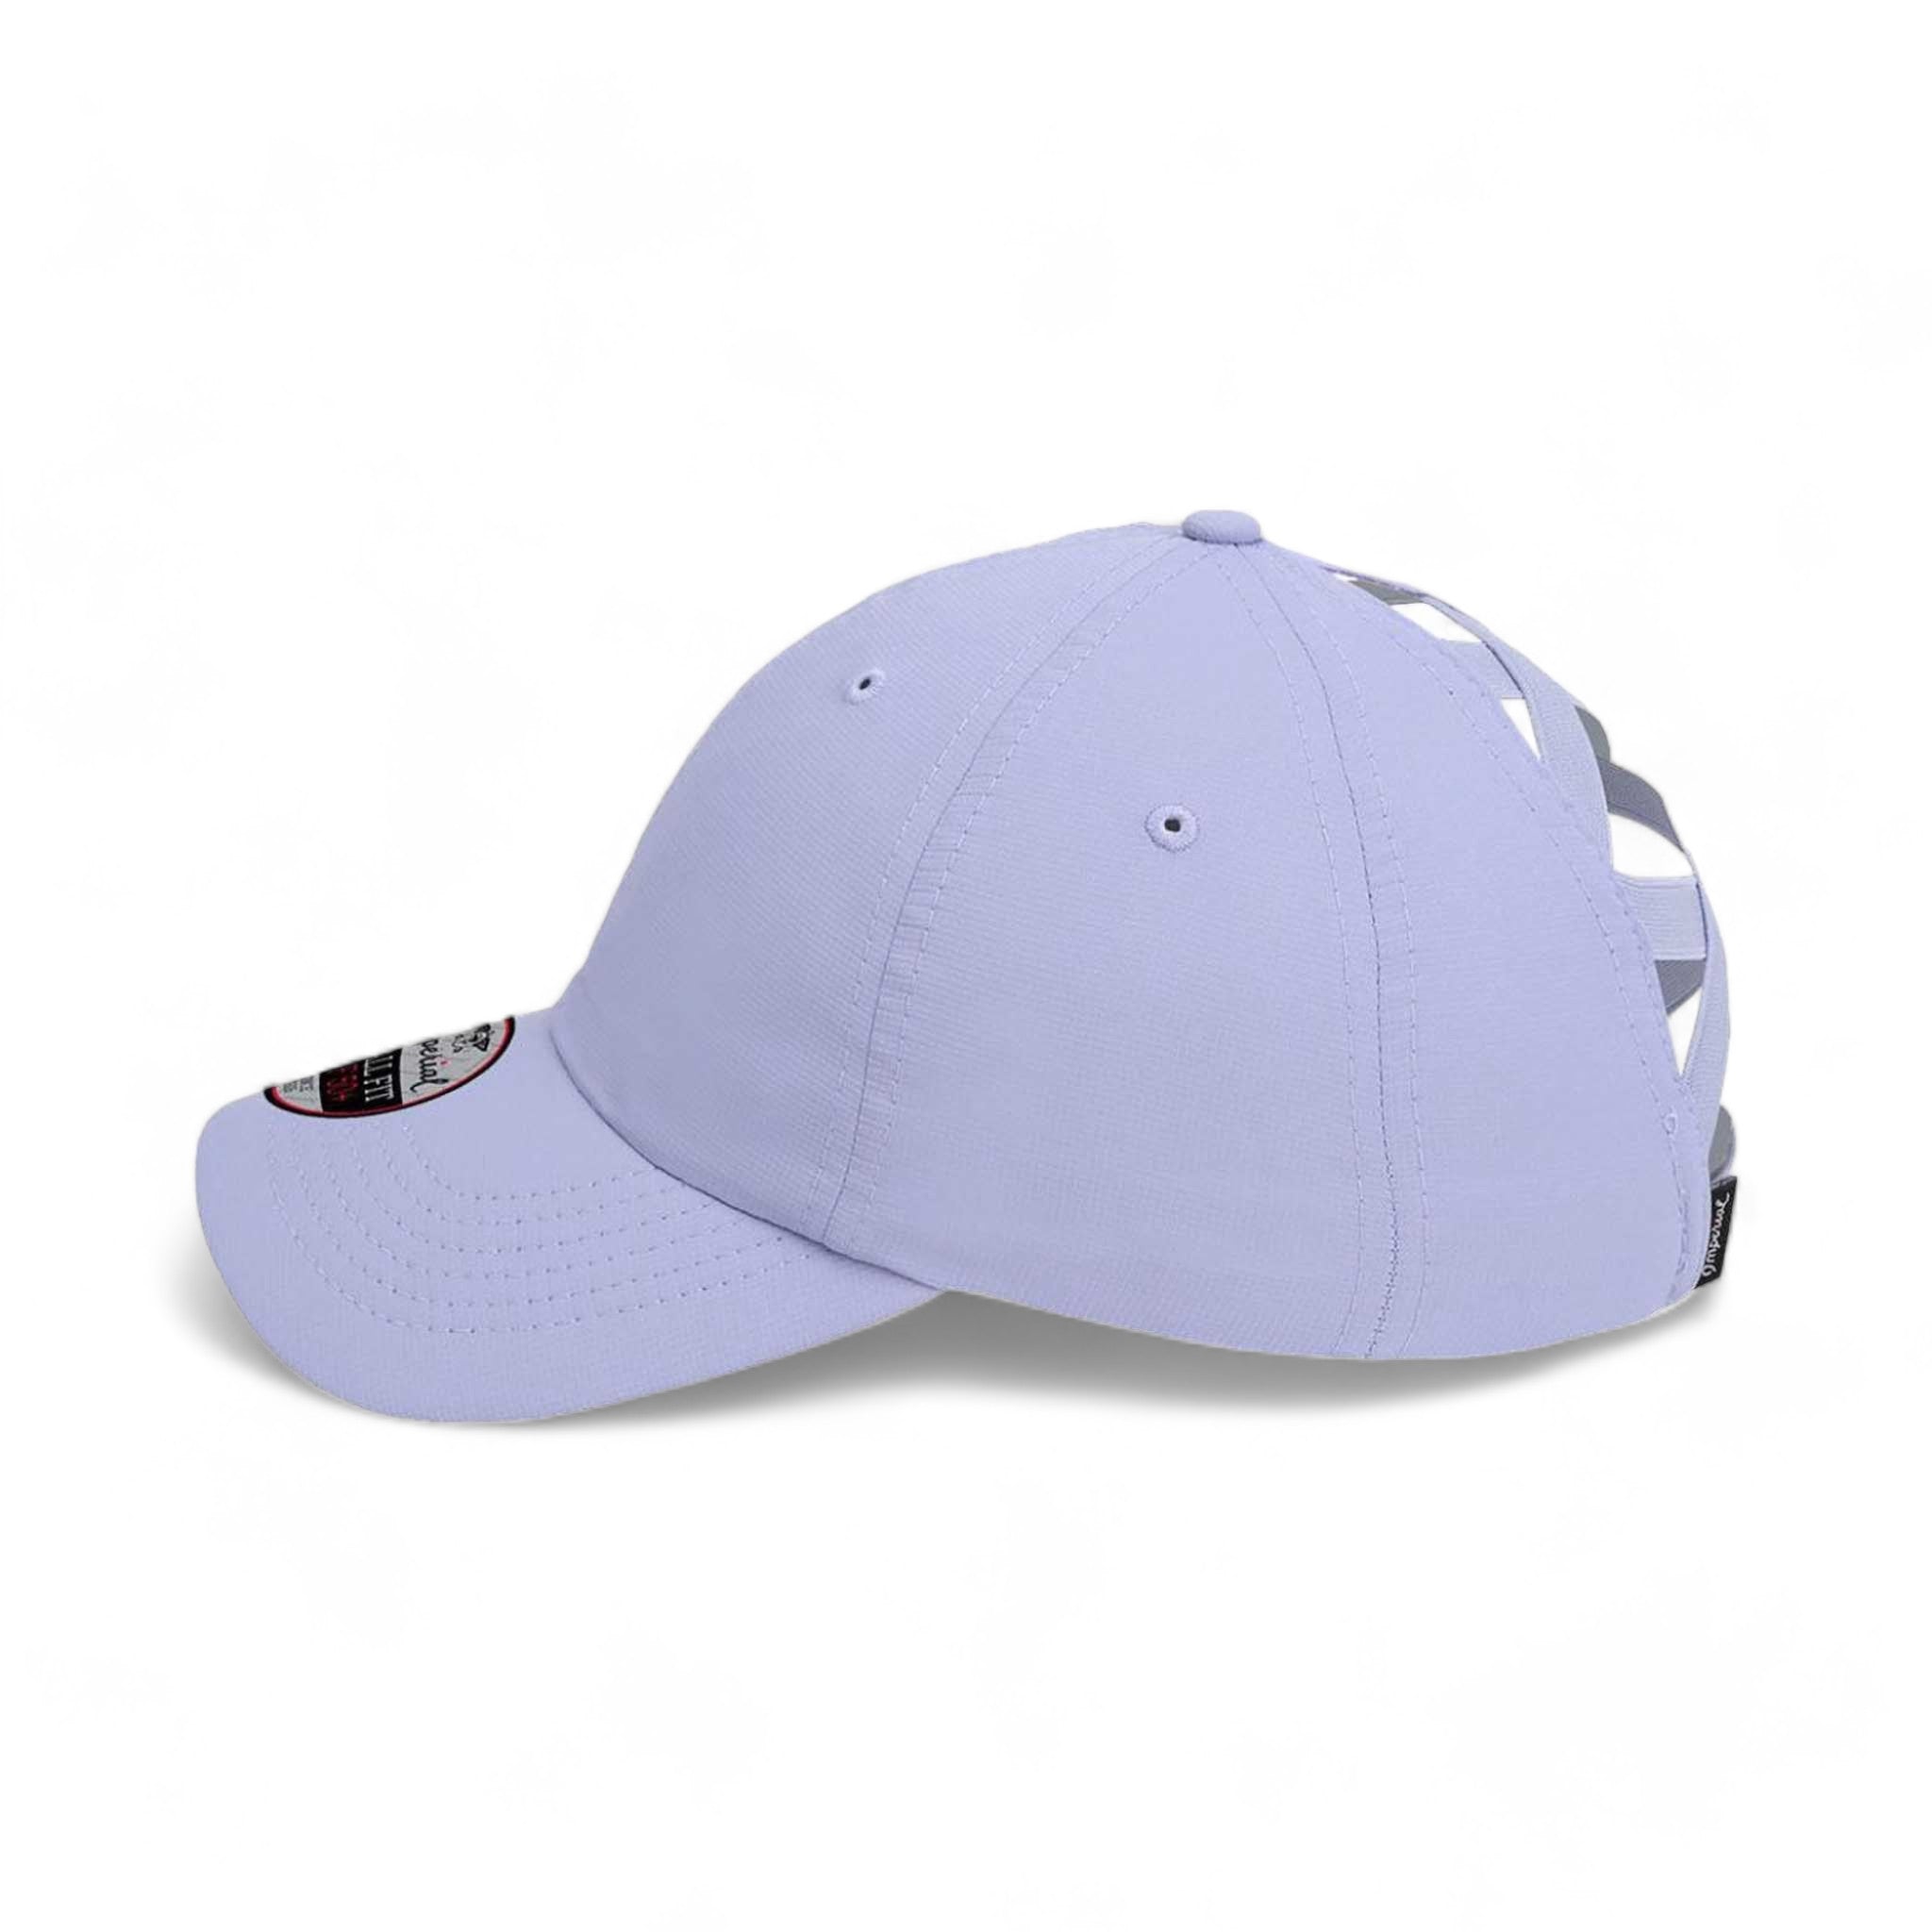 Side view of Imperial L338 custom hat in lavender